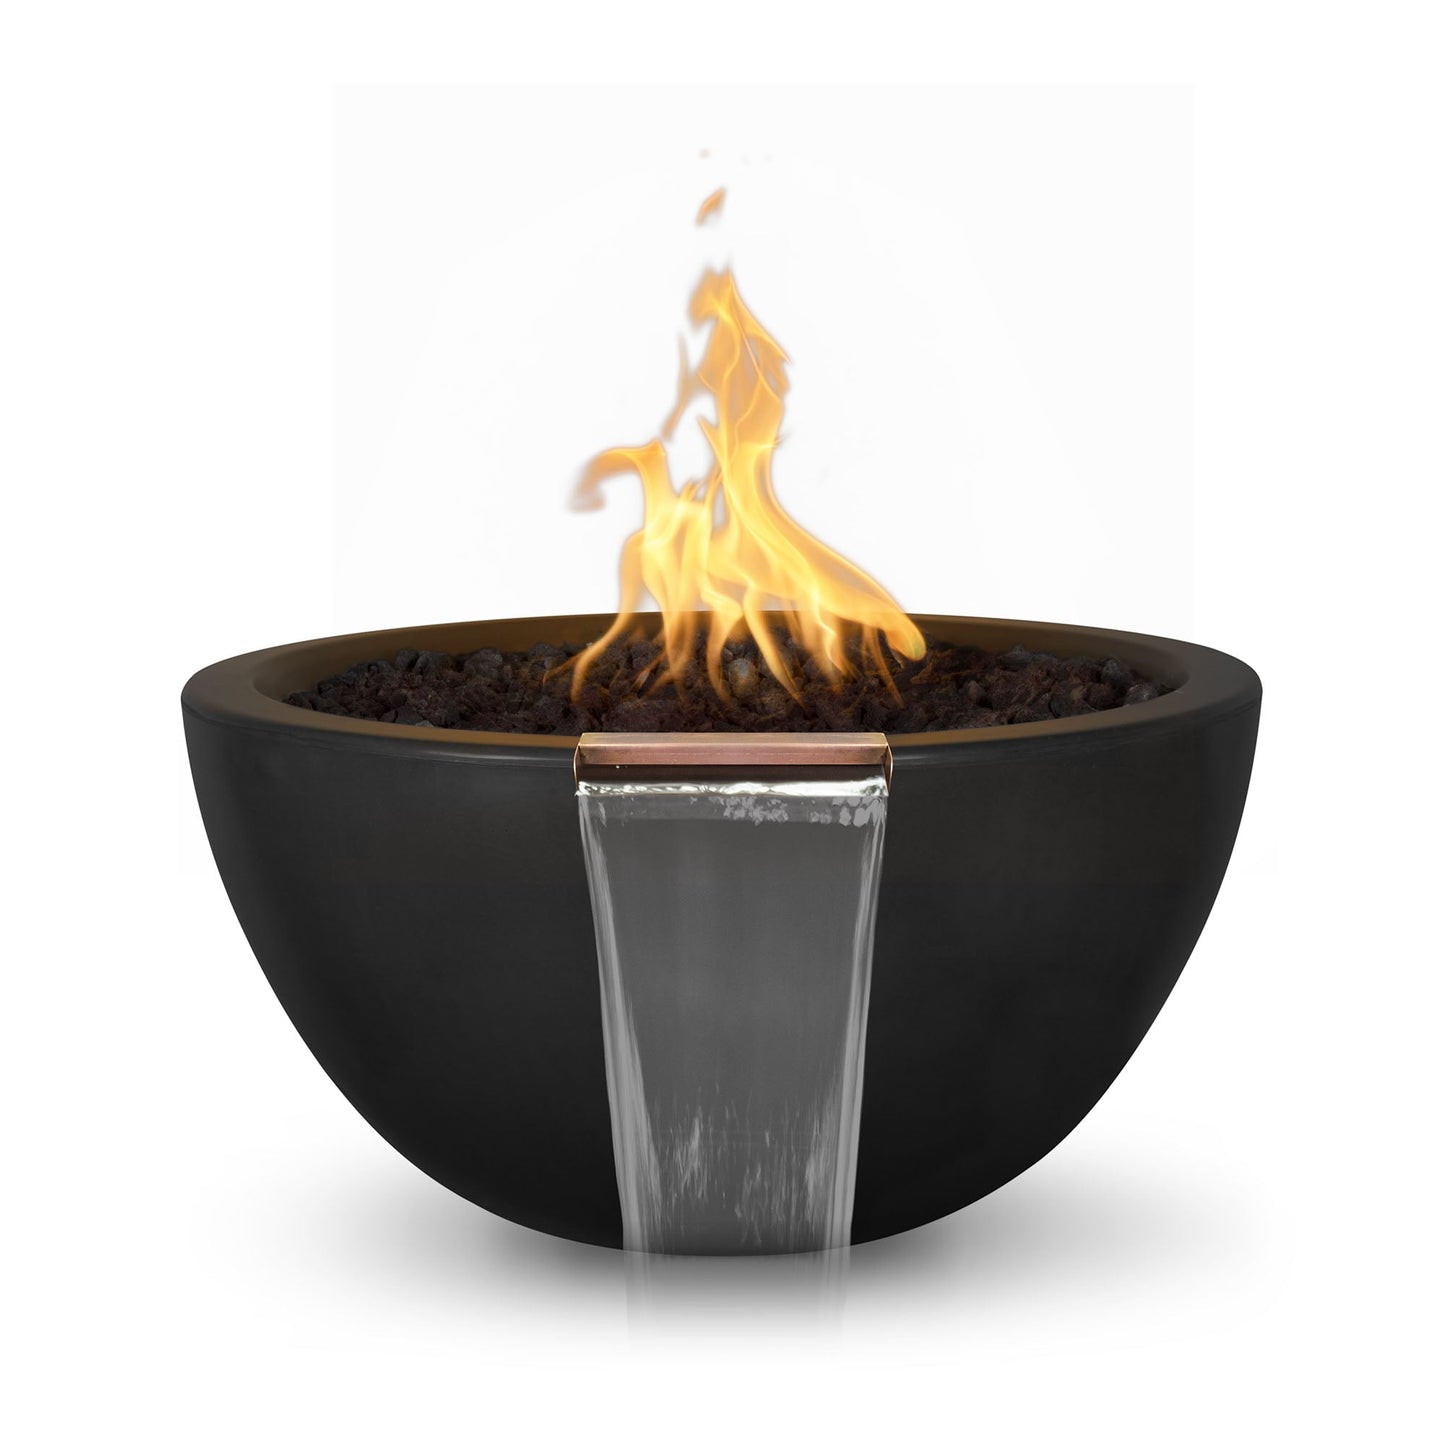 The Outdoor Plus Round Luna 38" Metallic Silver GFRC Concrete Natural Gas Fire & Water Bowl with Match Lit with Flame Sense Ignition